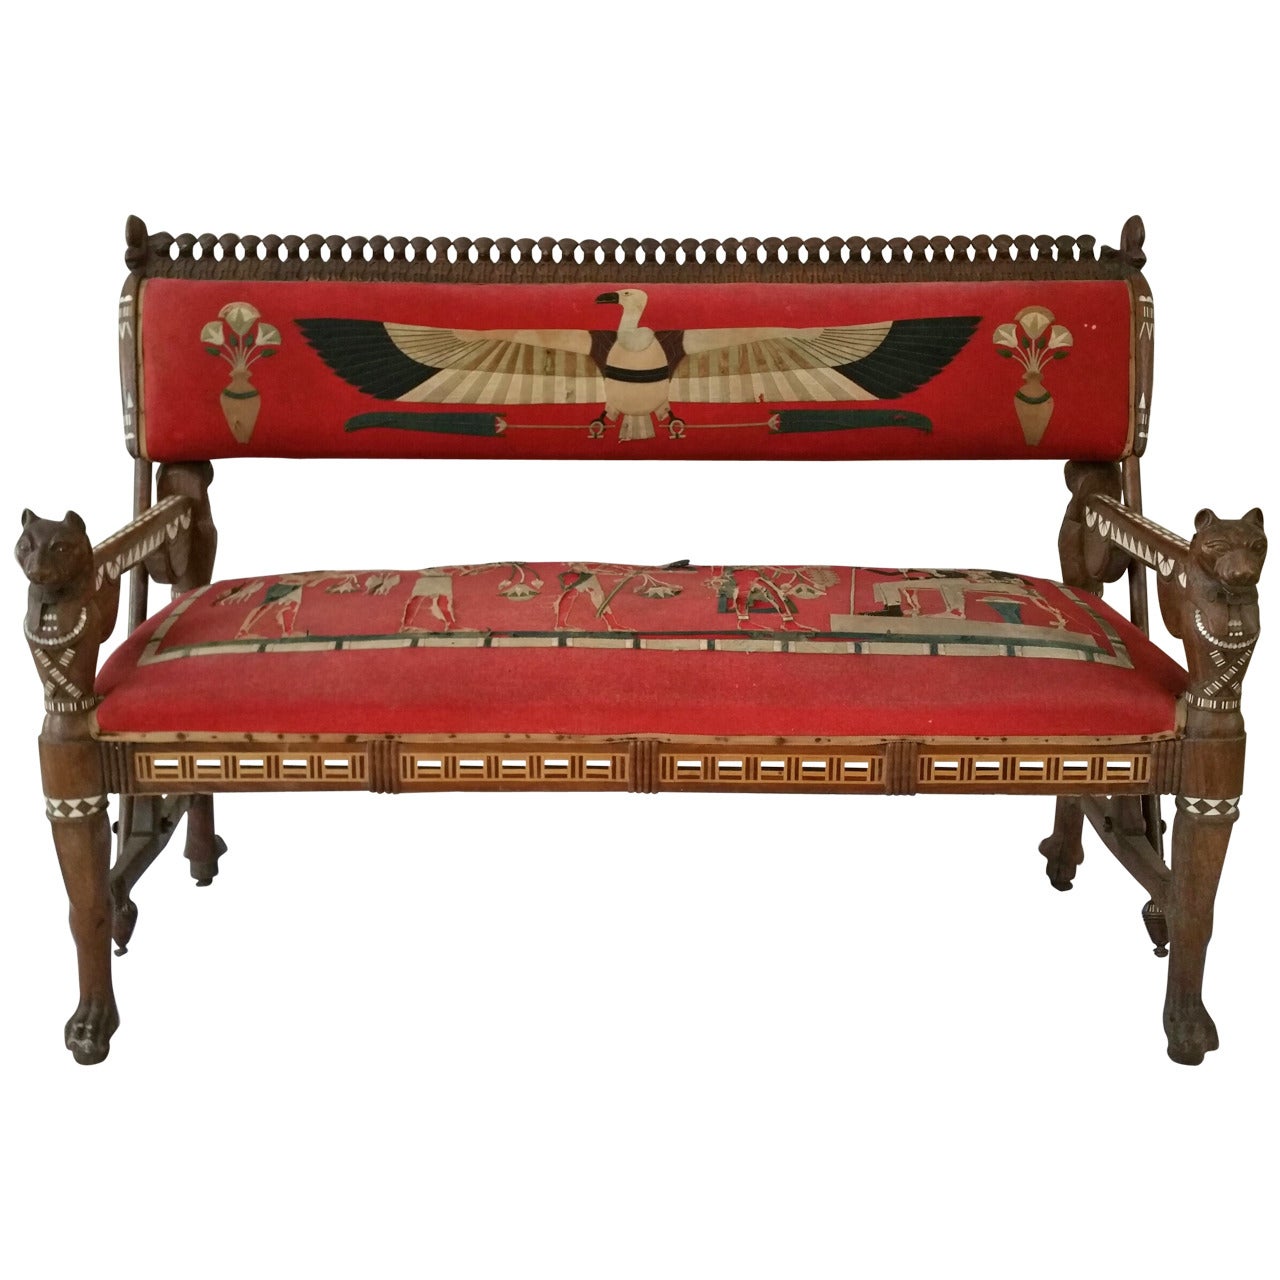 Rare Egyptian Revival Carved and Inlaid Rosewood Loveseat For Sale